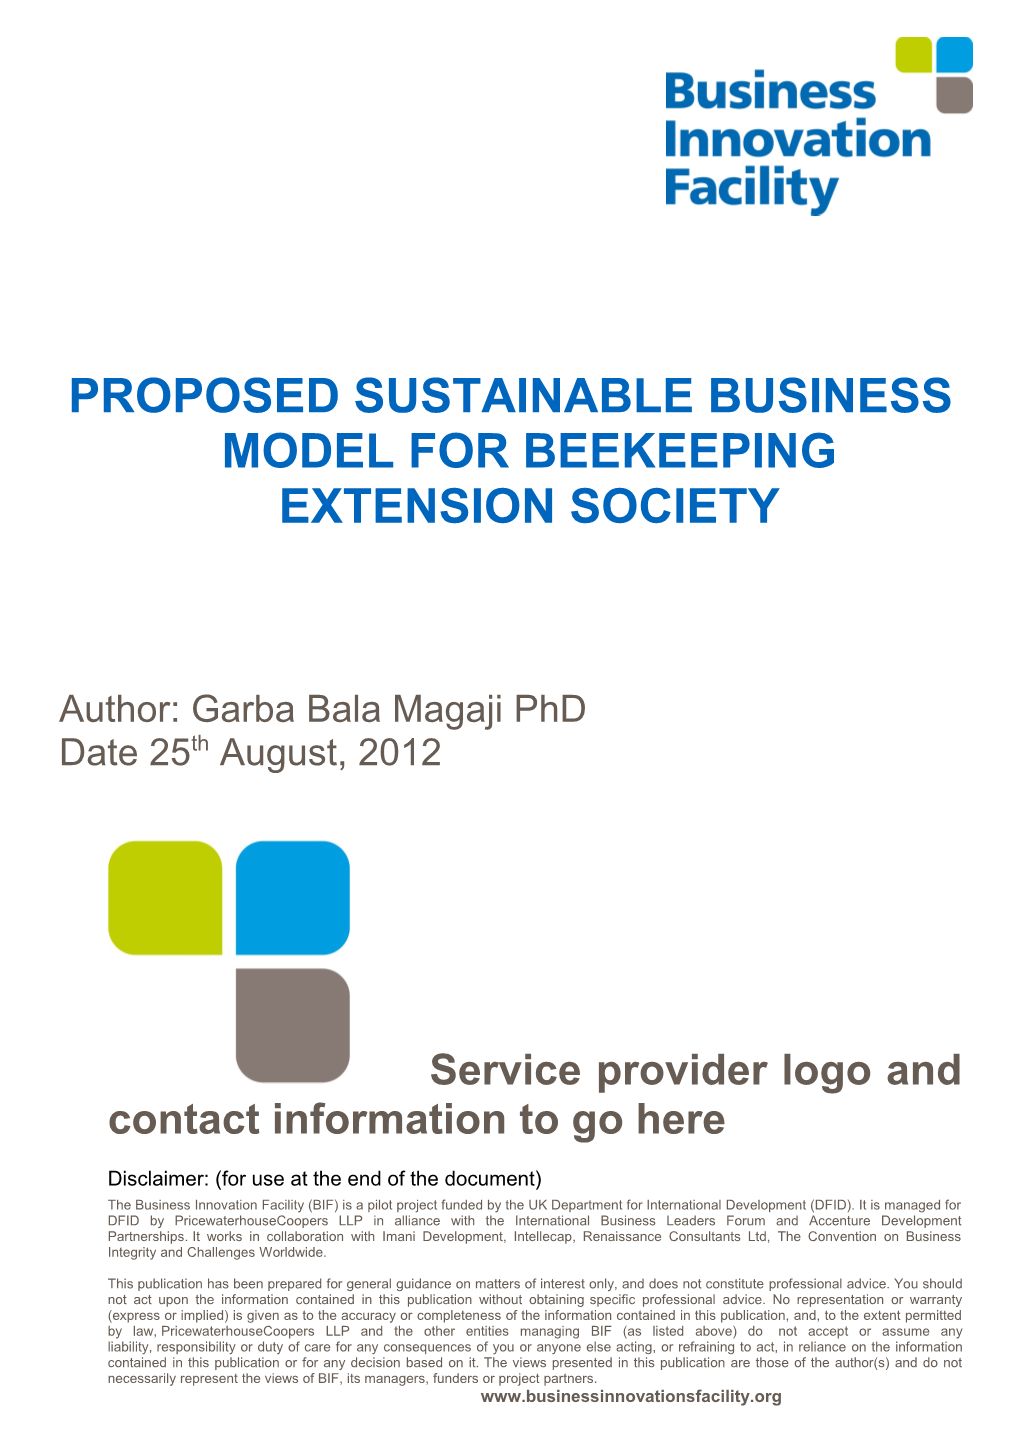 Proposed Sustainable Business Model for Beekeeping Extension Society